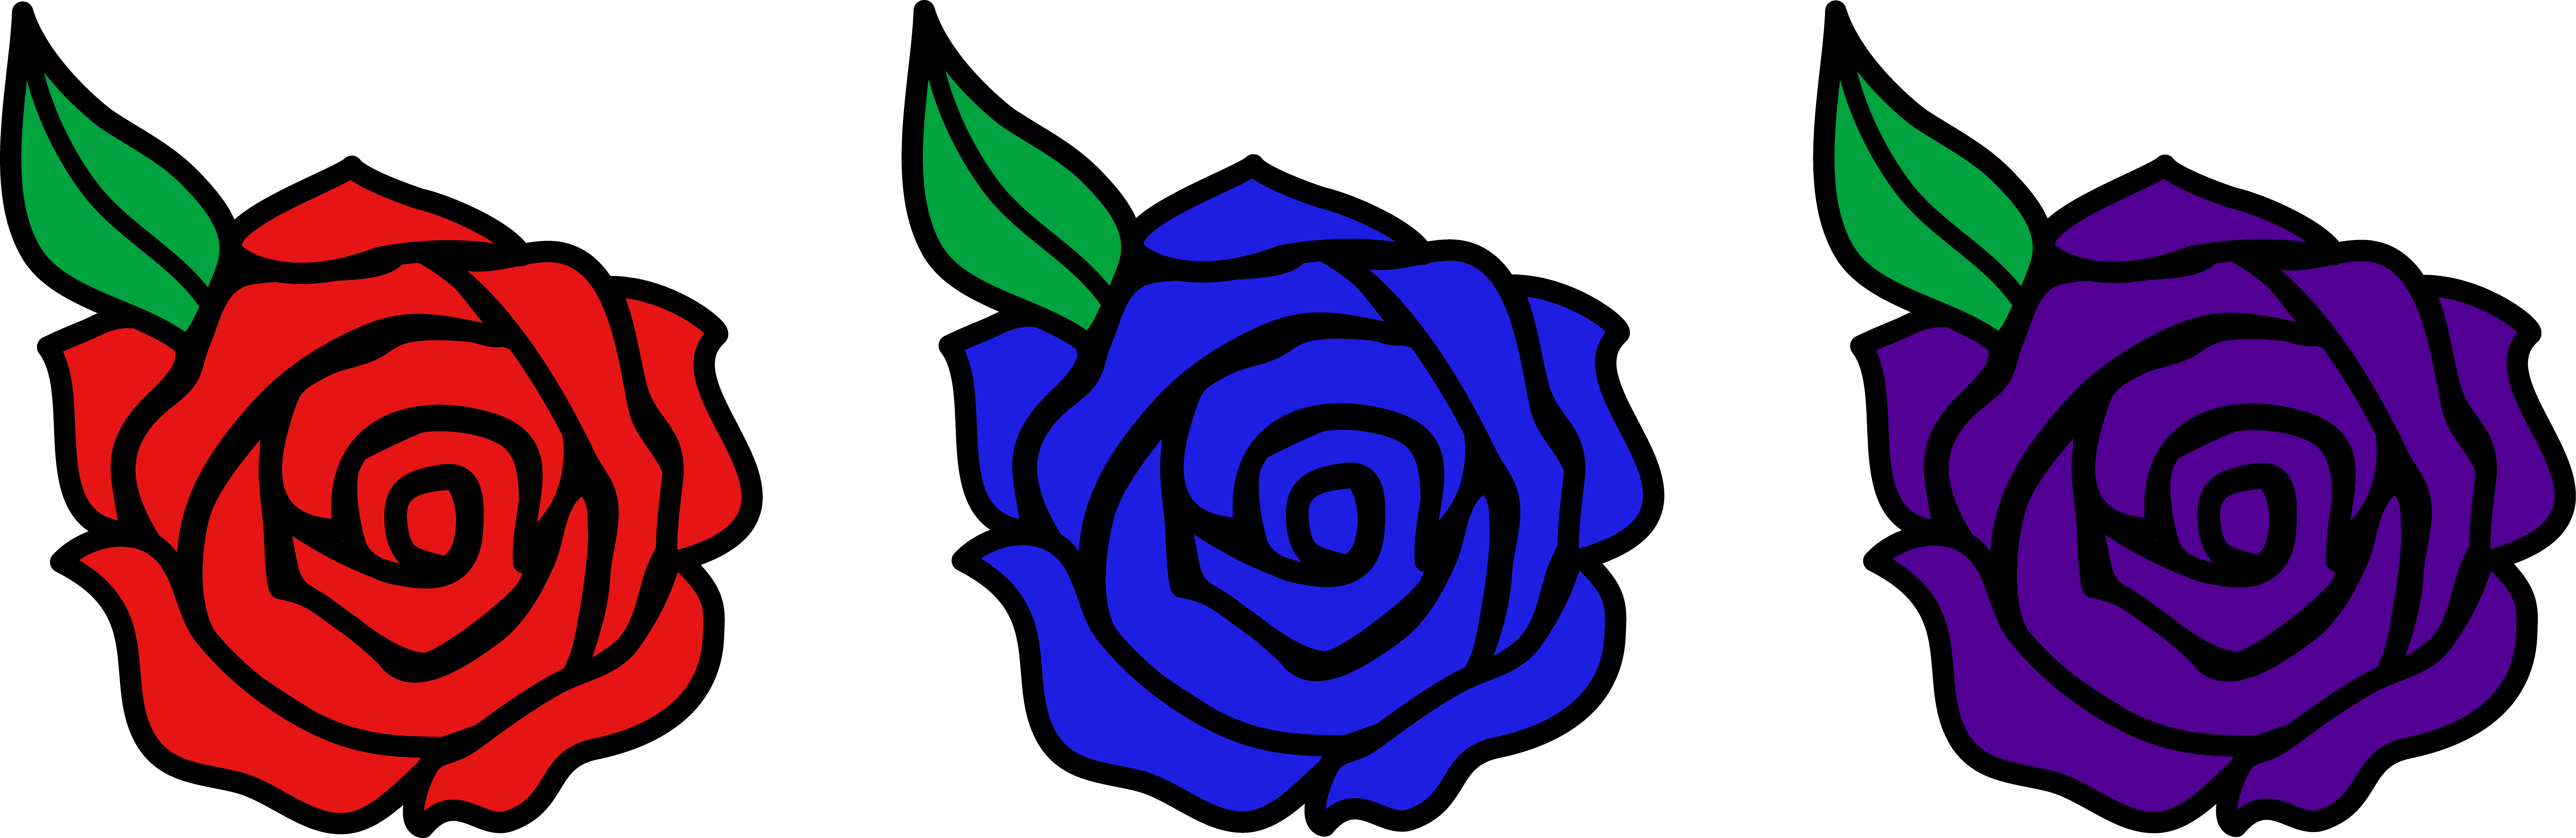 rose cartoon Cartoon rose pictures free download clip art png 2